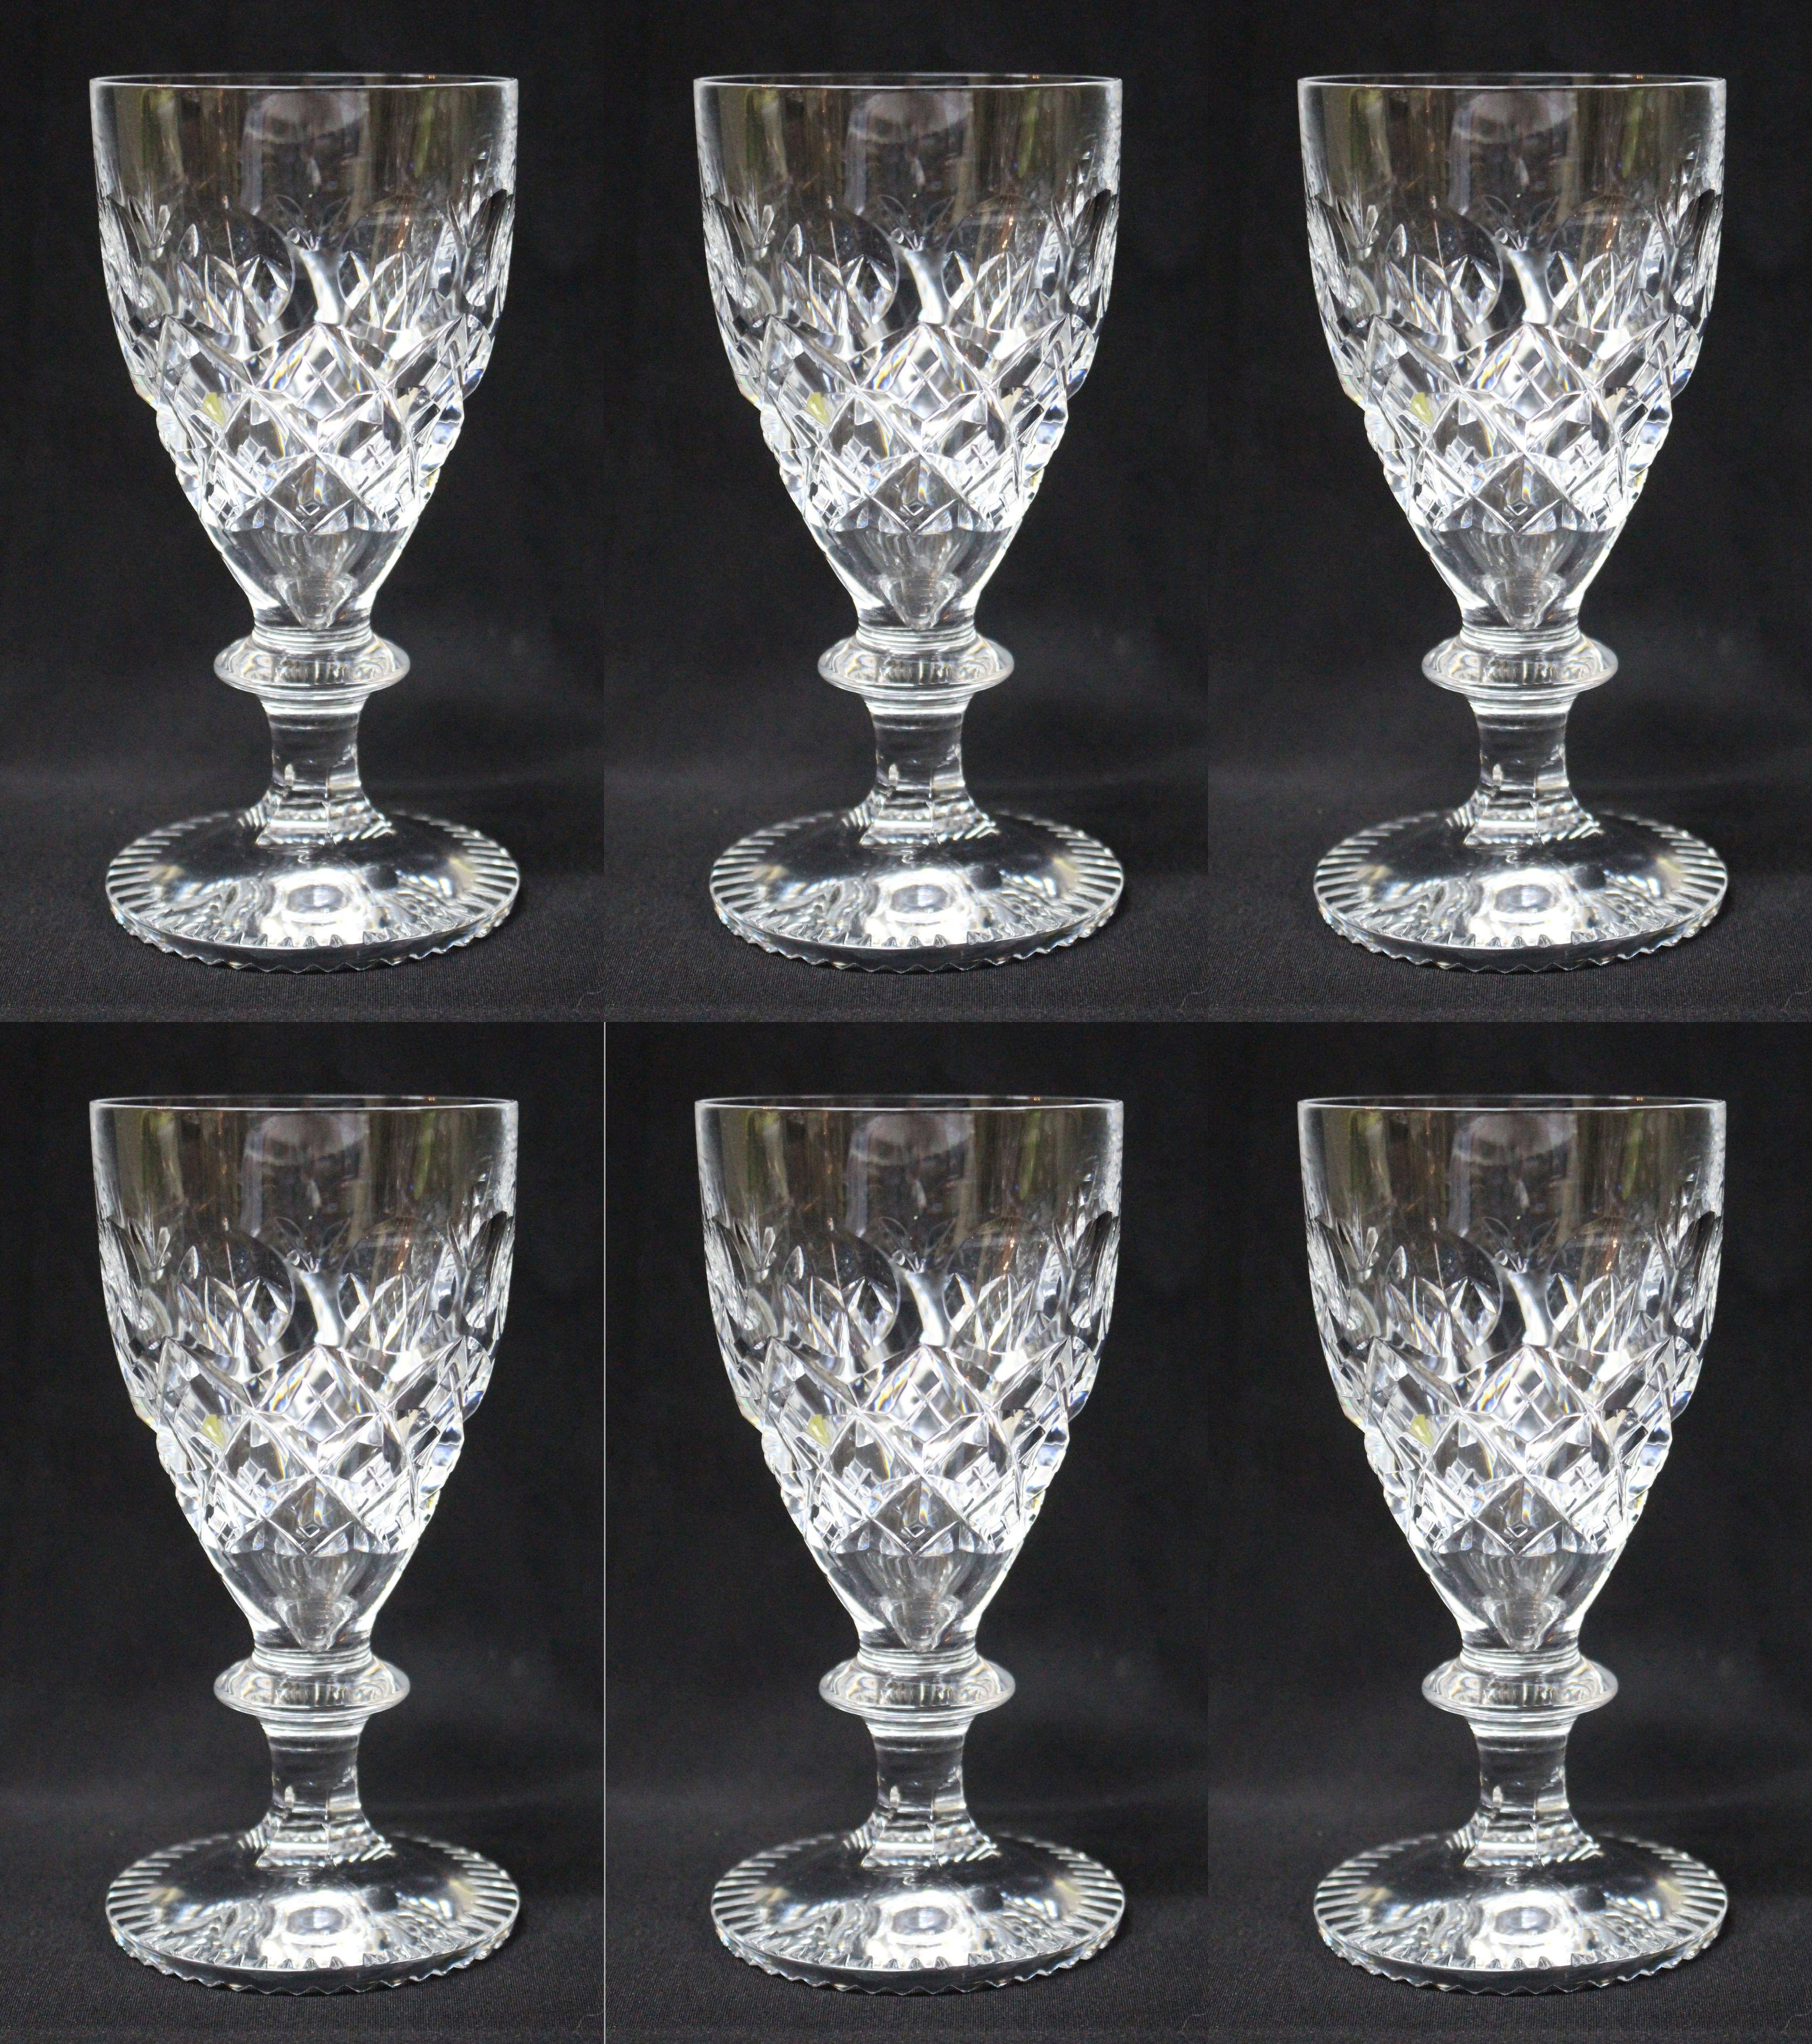 Set of 6 heavy cut glass English wine glasses


Very nice quality set of 6 fine cut crystal wine glass goblets.

Manufactured in the famous Stourbridge glassworks in England, c.1950

Measures: Top diameter: 7.5 cm / 3 3/4 in

Height: 15.5